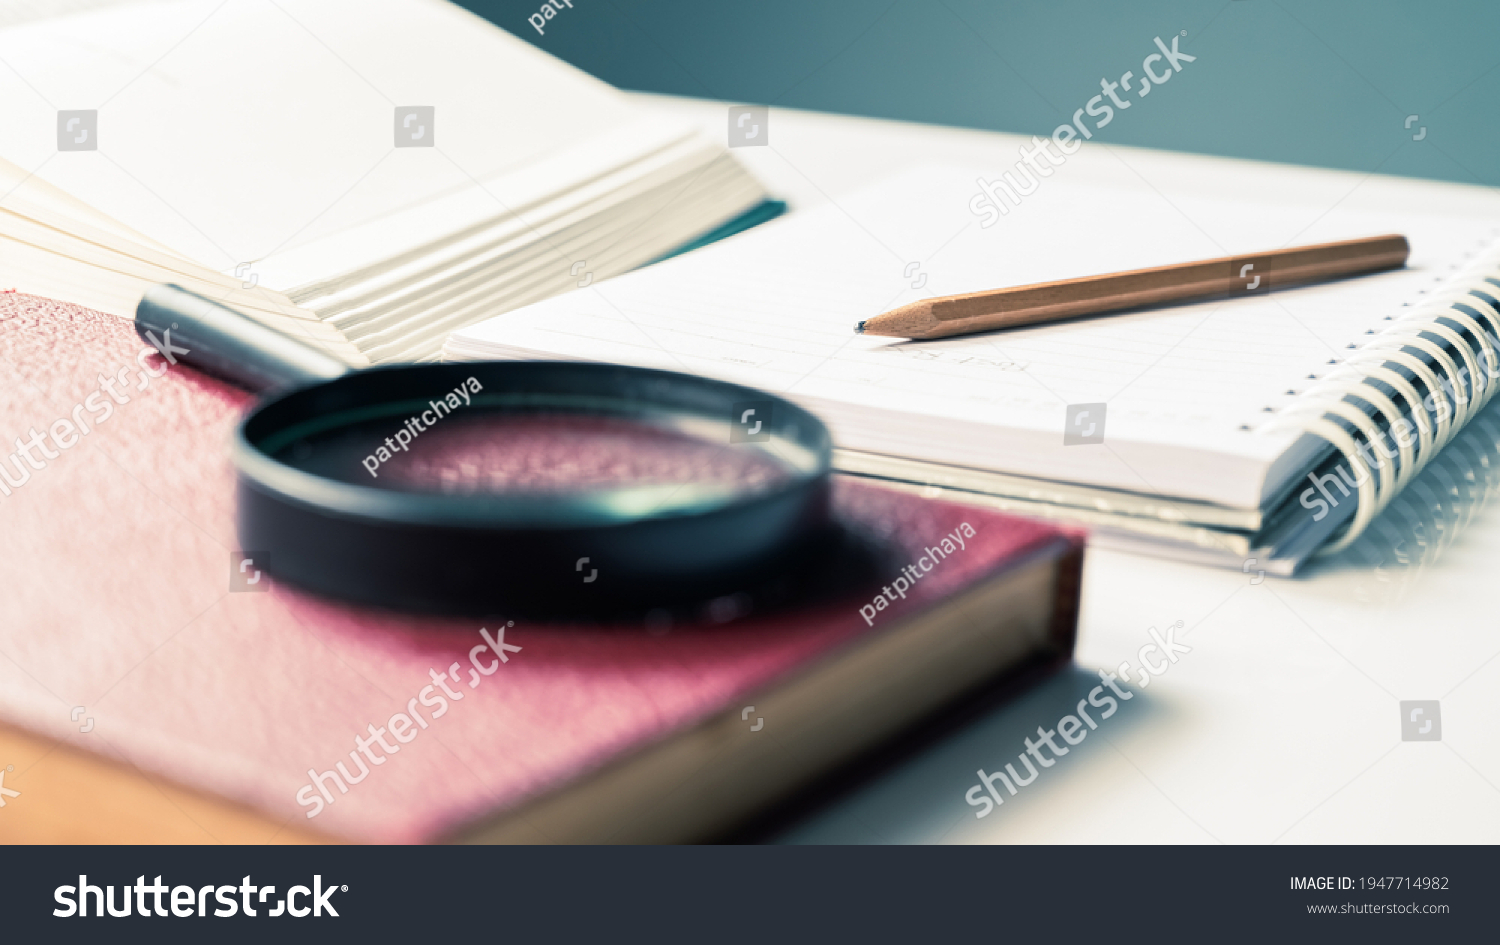 Closeup pencil on notebook with part of opened book and magnifying glass, reading for writing, summarize the content #1947714982